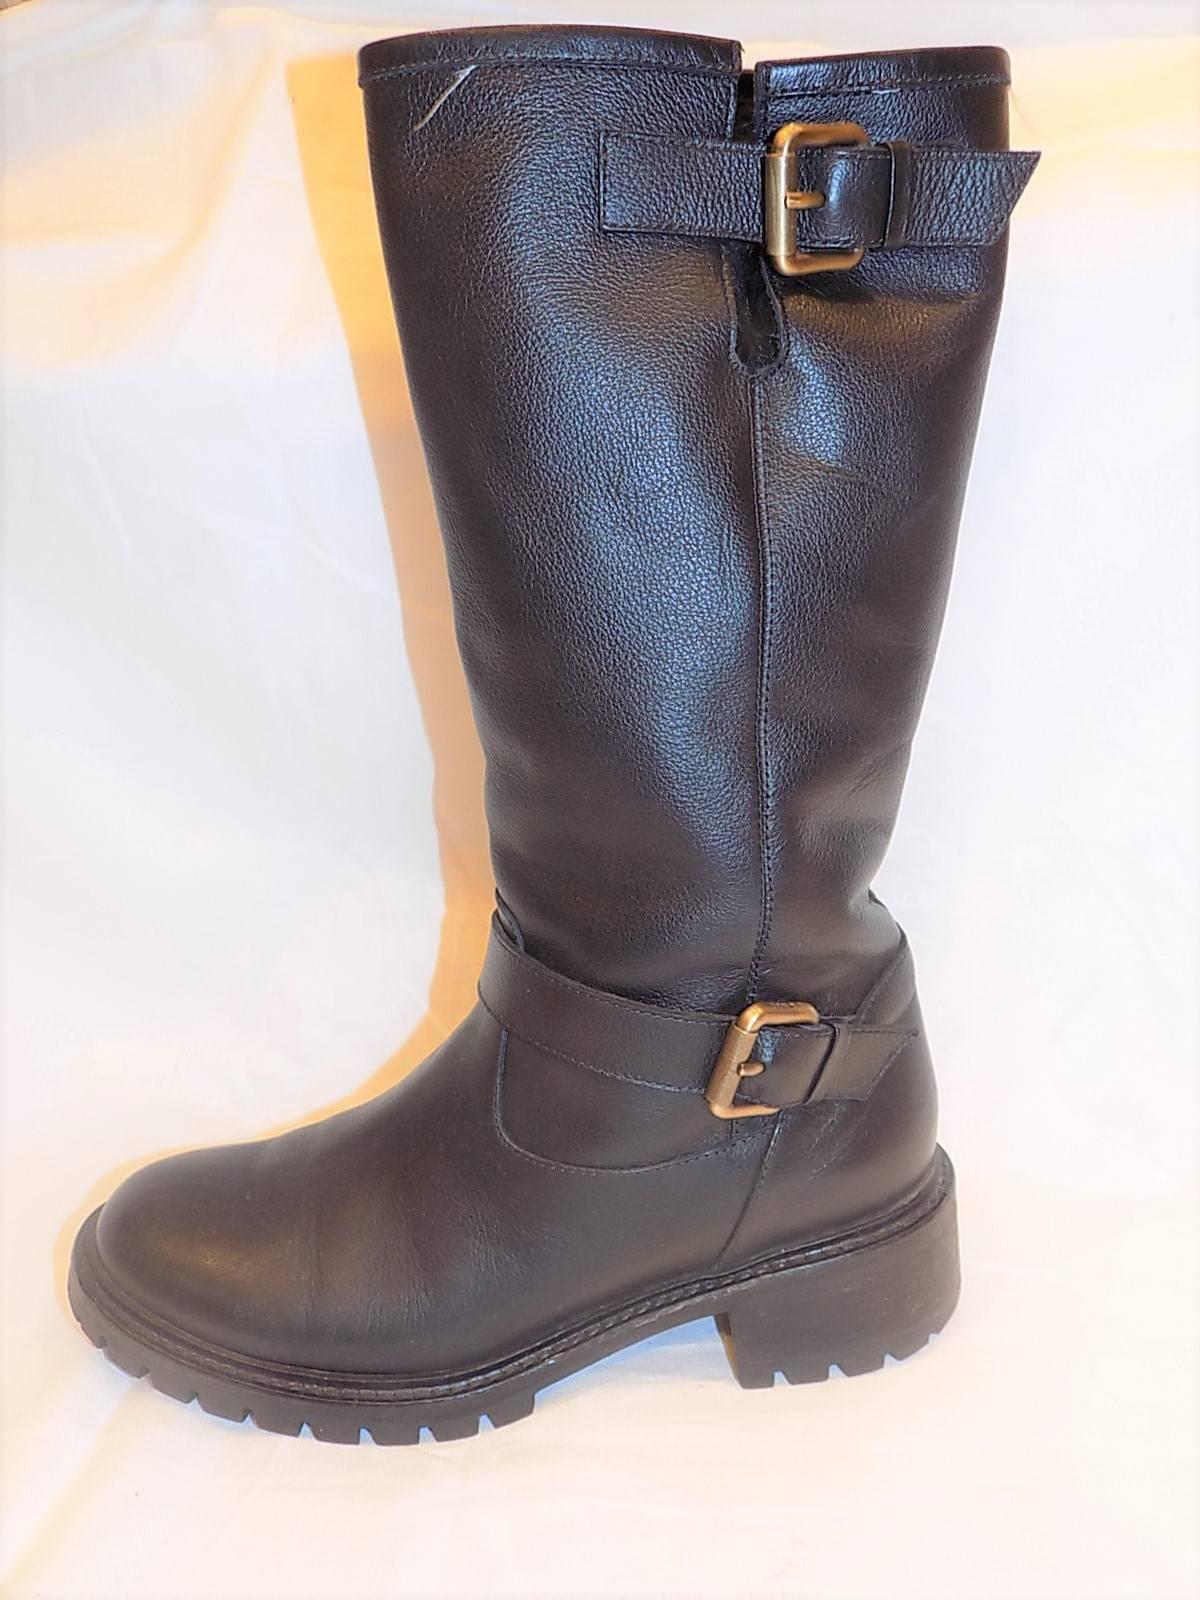 
worn once in pristine condition. Shipped in Original Box. Retail Price $1000 Plush, cozy rabbit fur lines a stylish leather motorcycle boot detailed with buckled straps at the top and base of the shaft. A lugged rubber sole adds a tough finish to